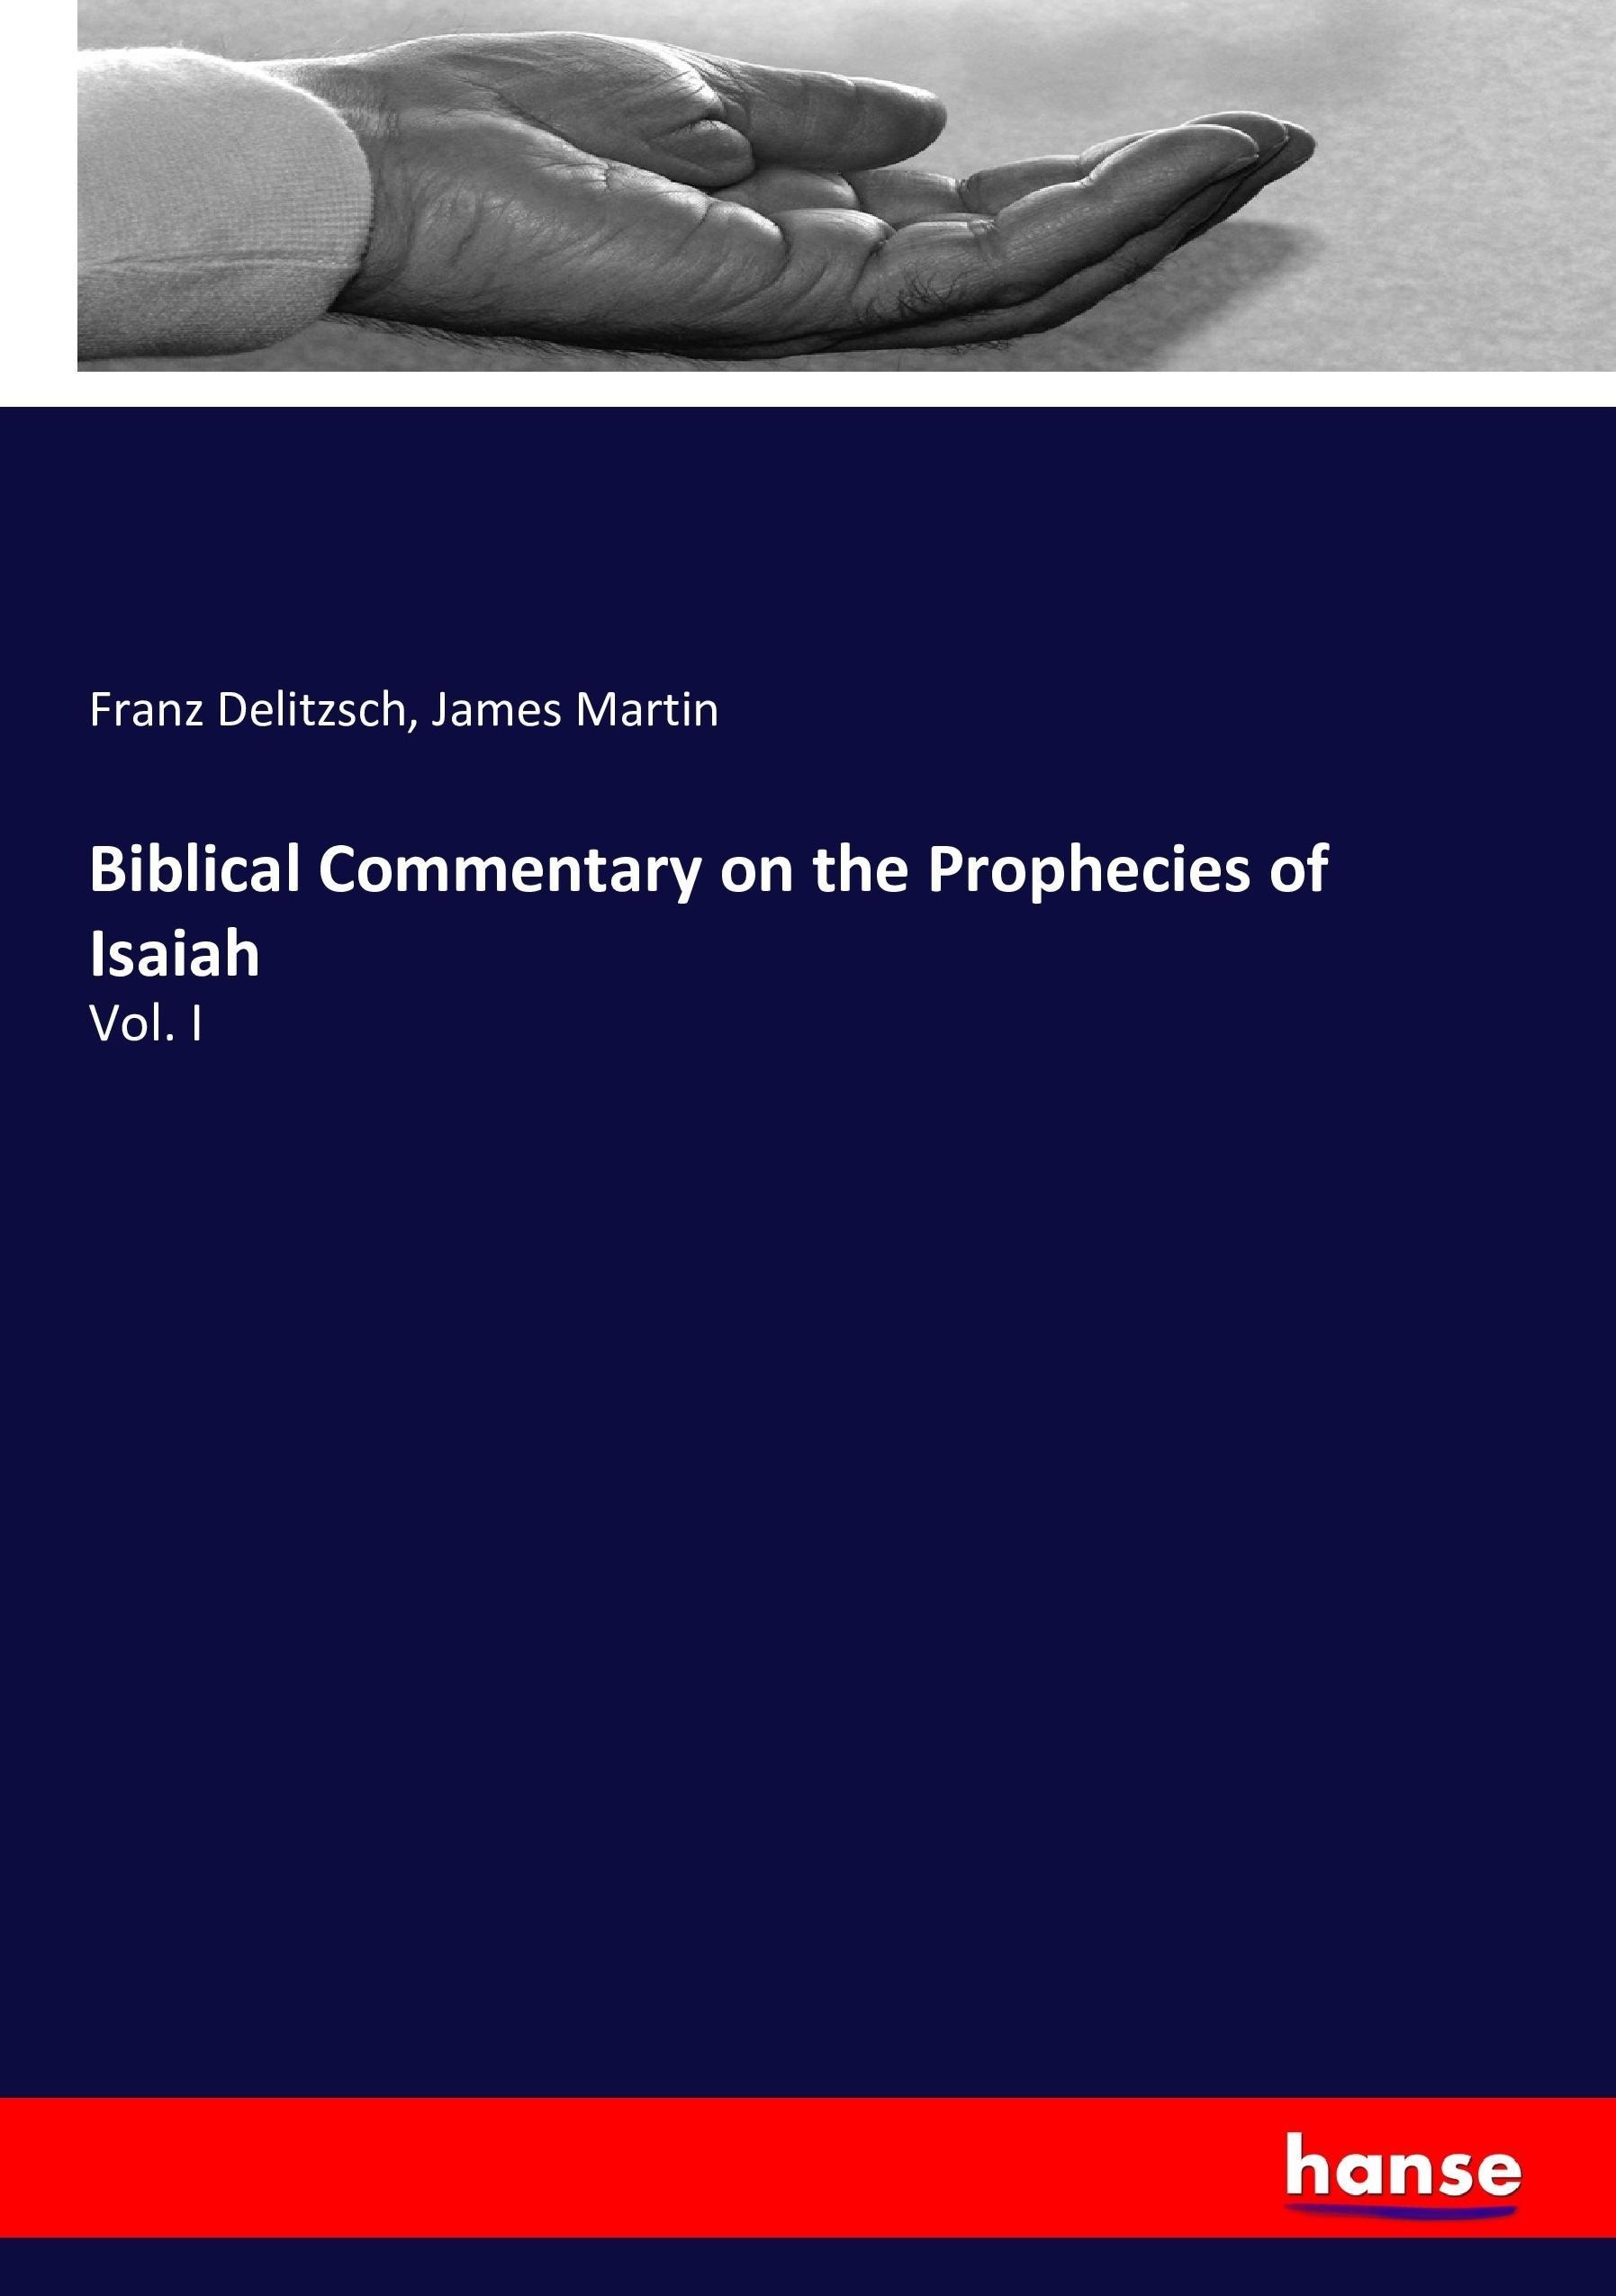 Biblical Commentary on the Prophecies of Isaiah - Delitzsch, Franz Martin, James